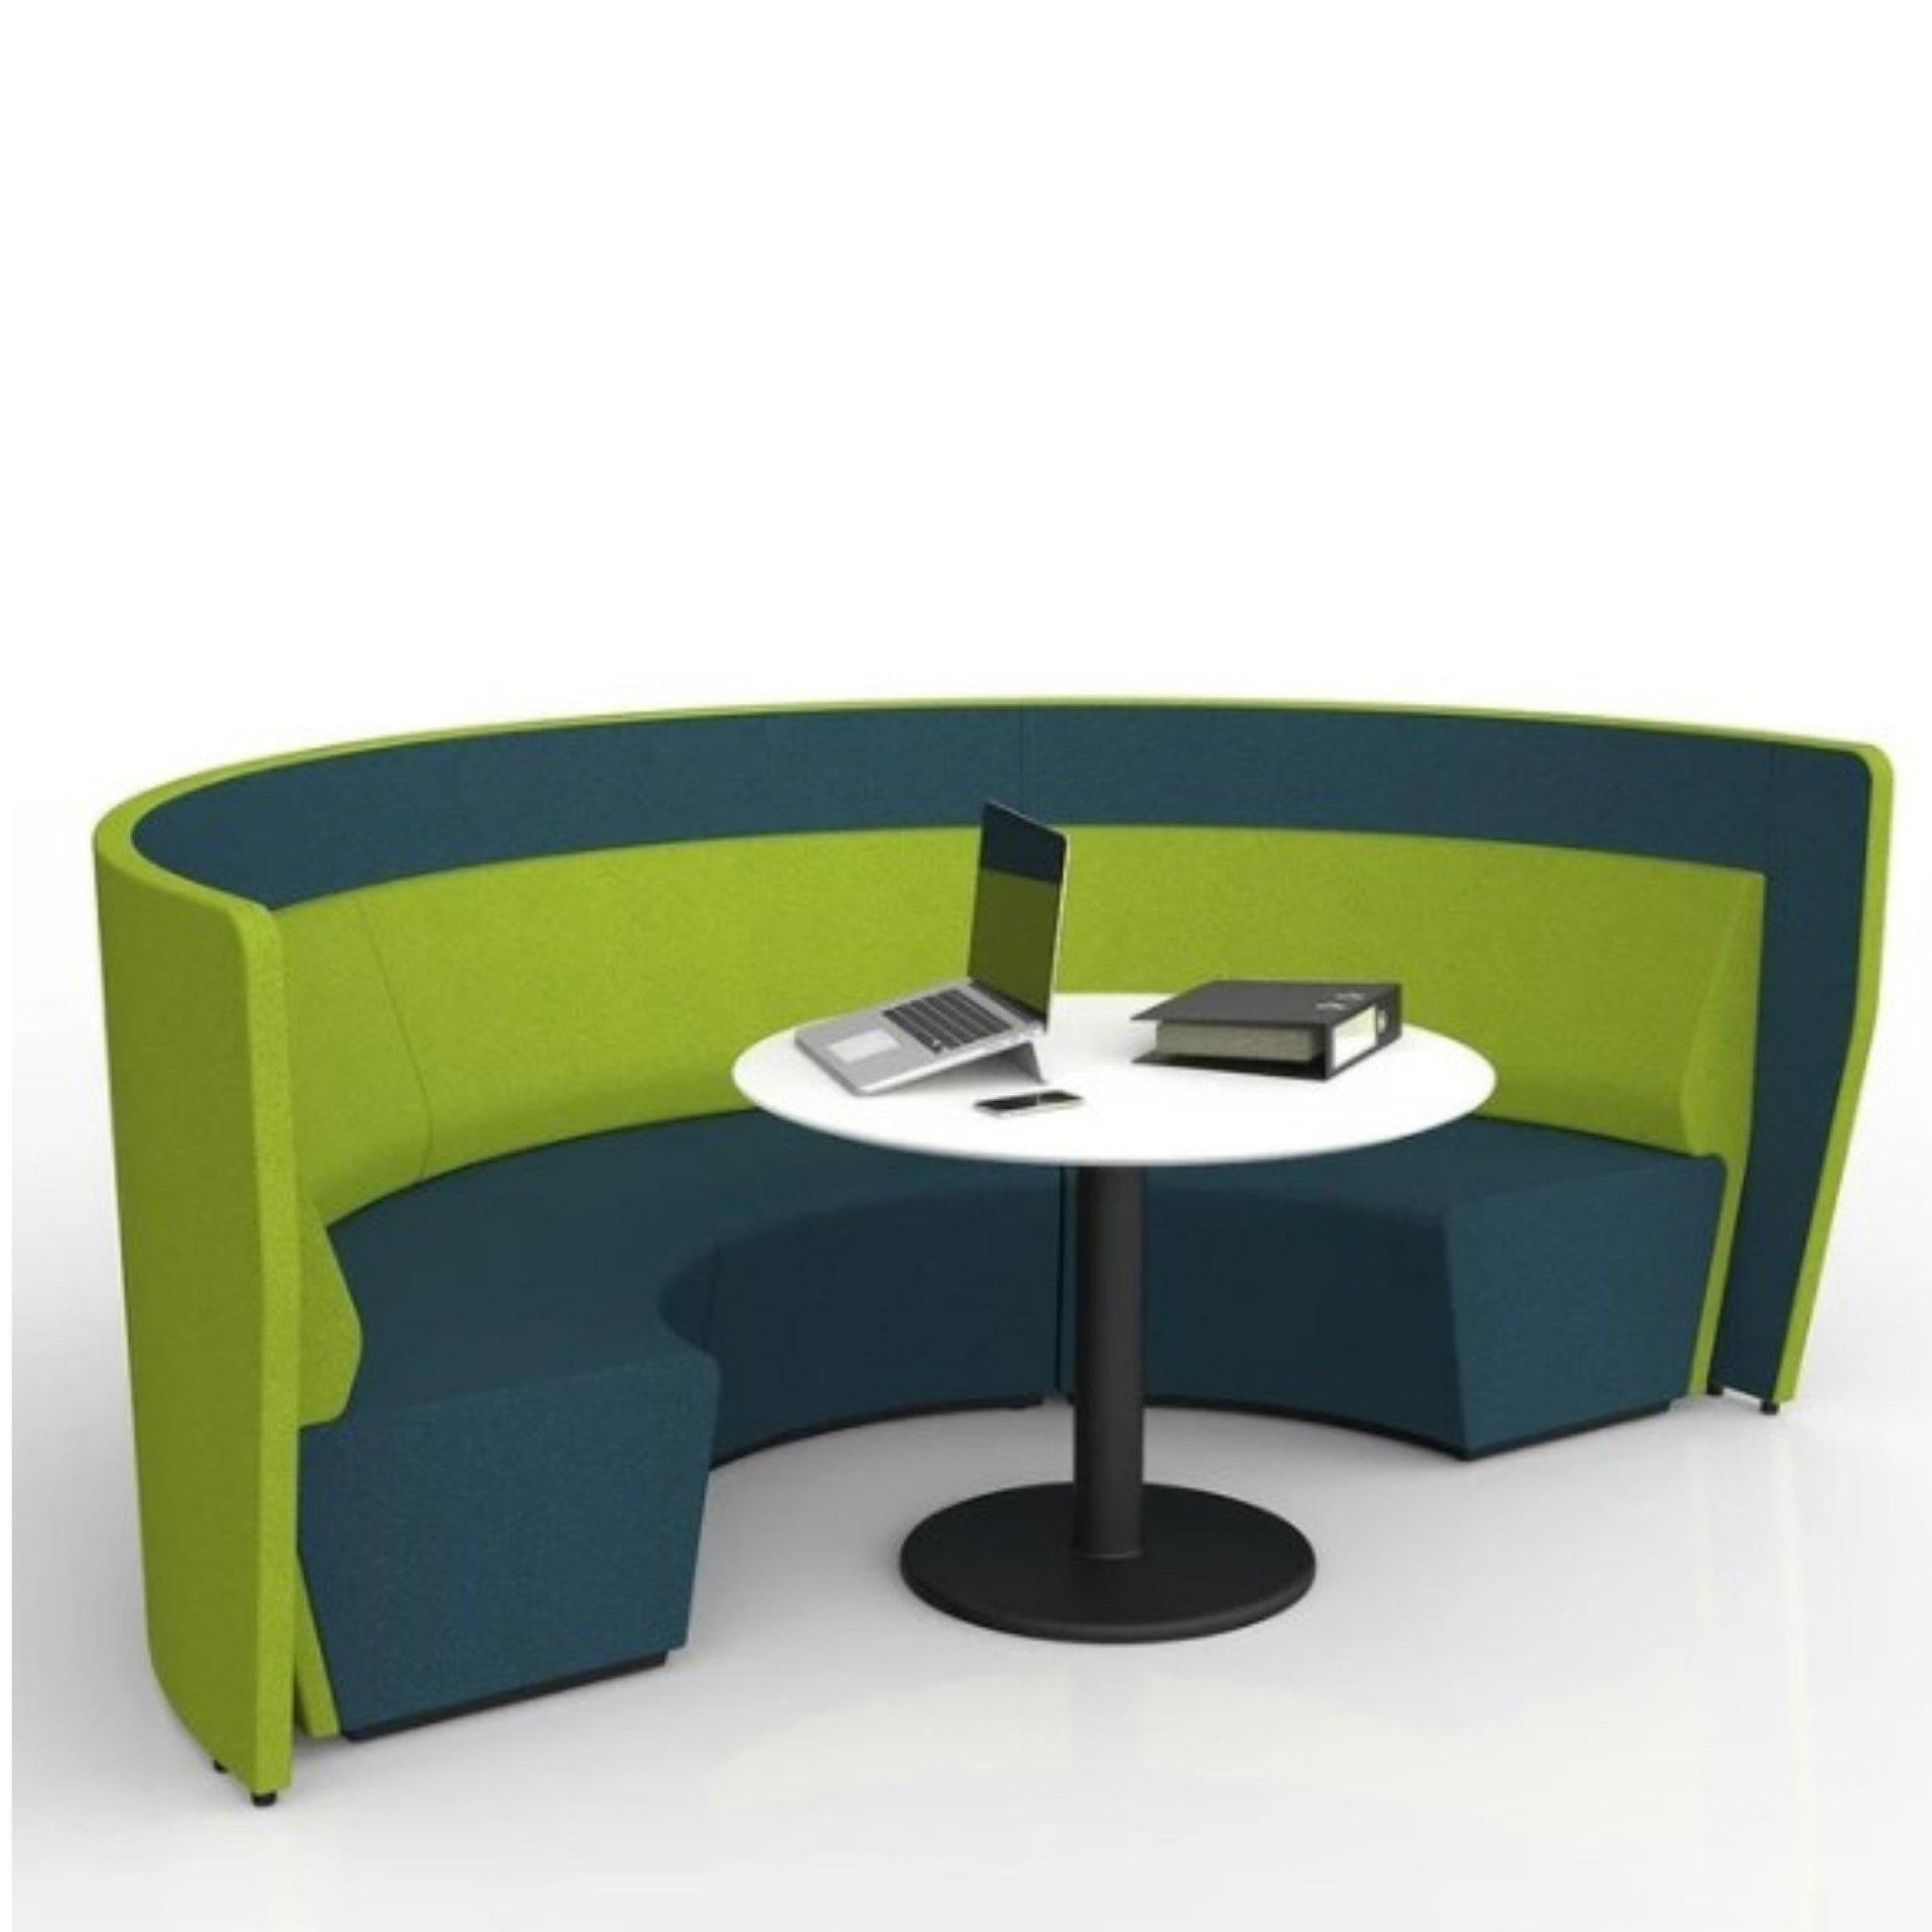 Motion Arc Collaboration Booth with Walls - Office Furniture Company 